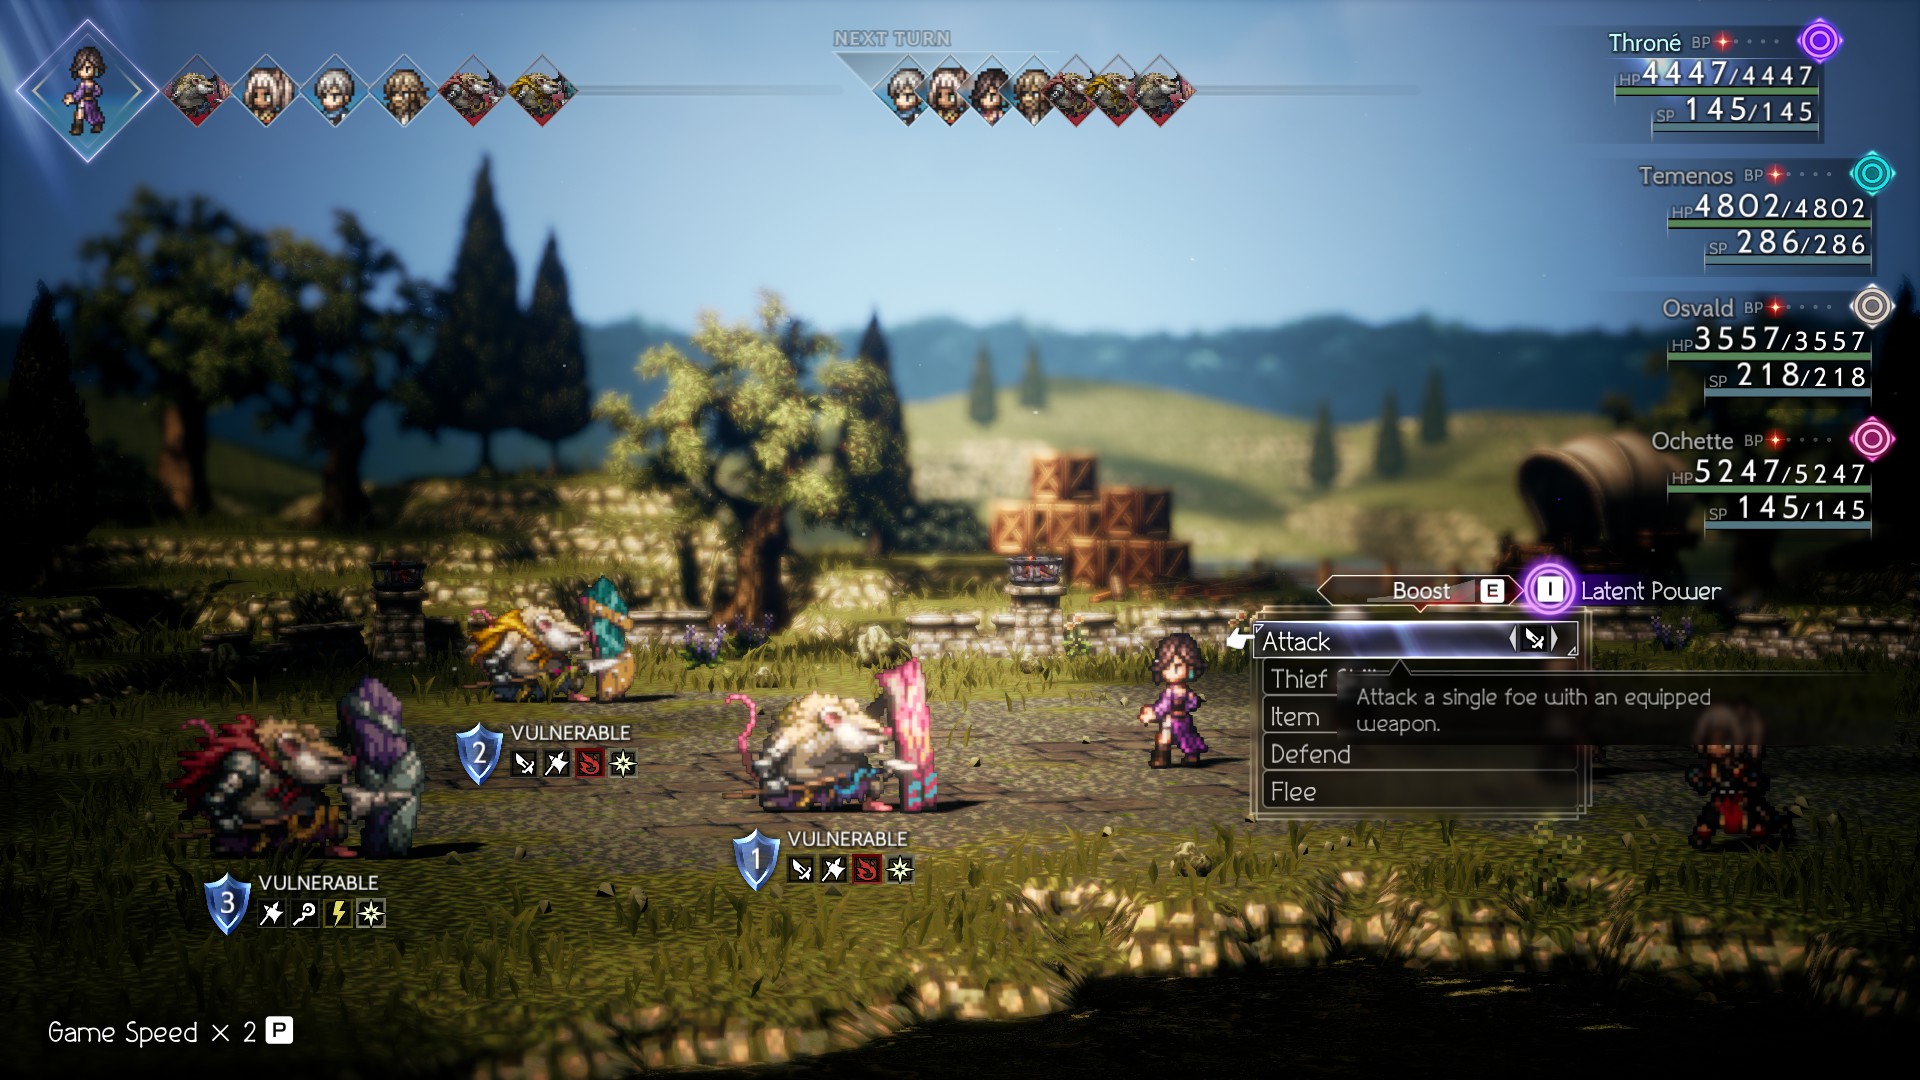 Best game & graphics options settings for Octopath Traveler 2